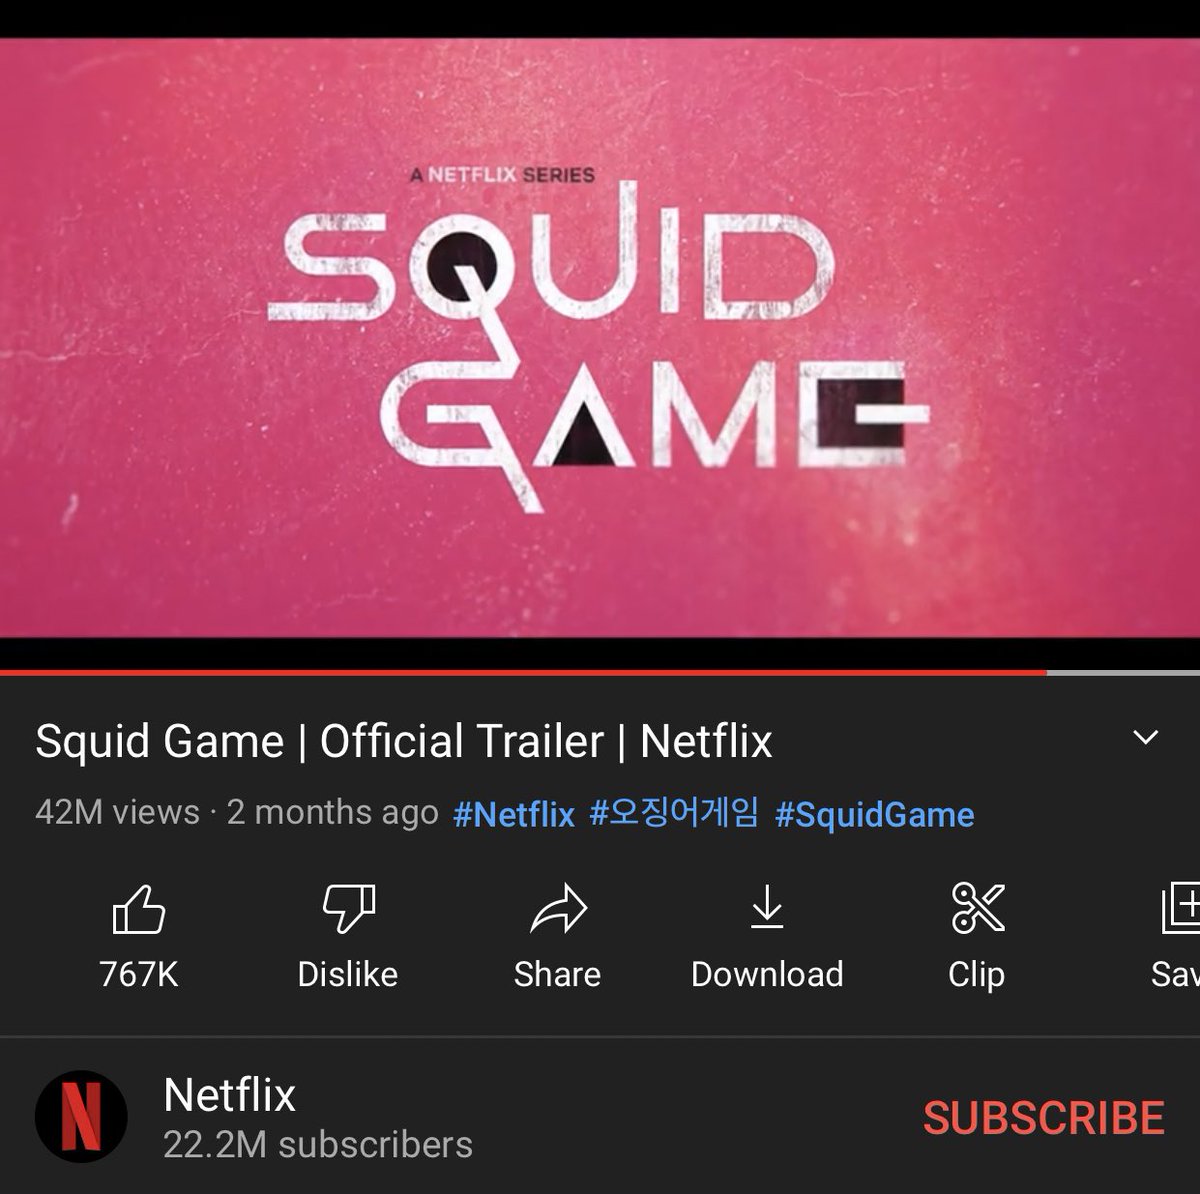 Wow…MrBeast’s Squid Game video just got more likes than the Squid Game’s trailer in less than an hour! O.O #MrBeastSquidGame